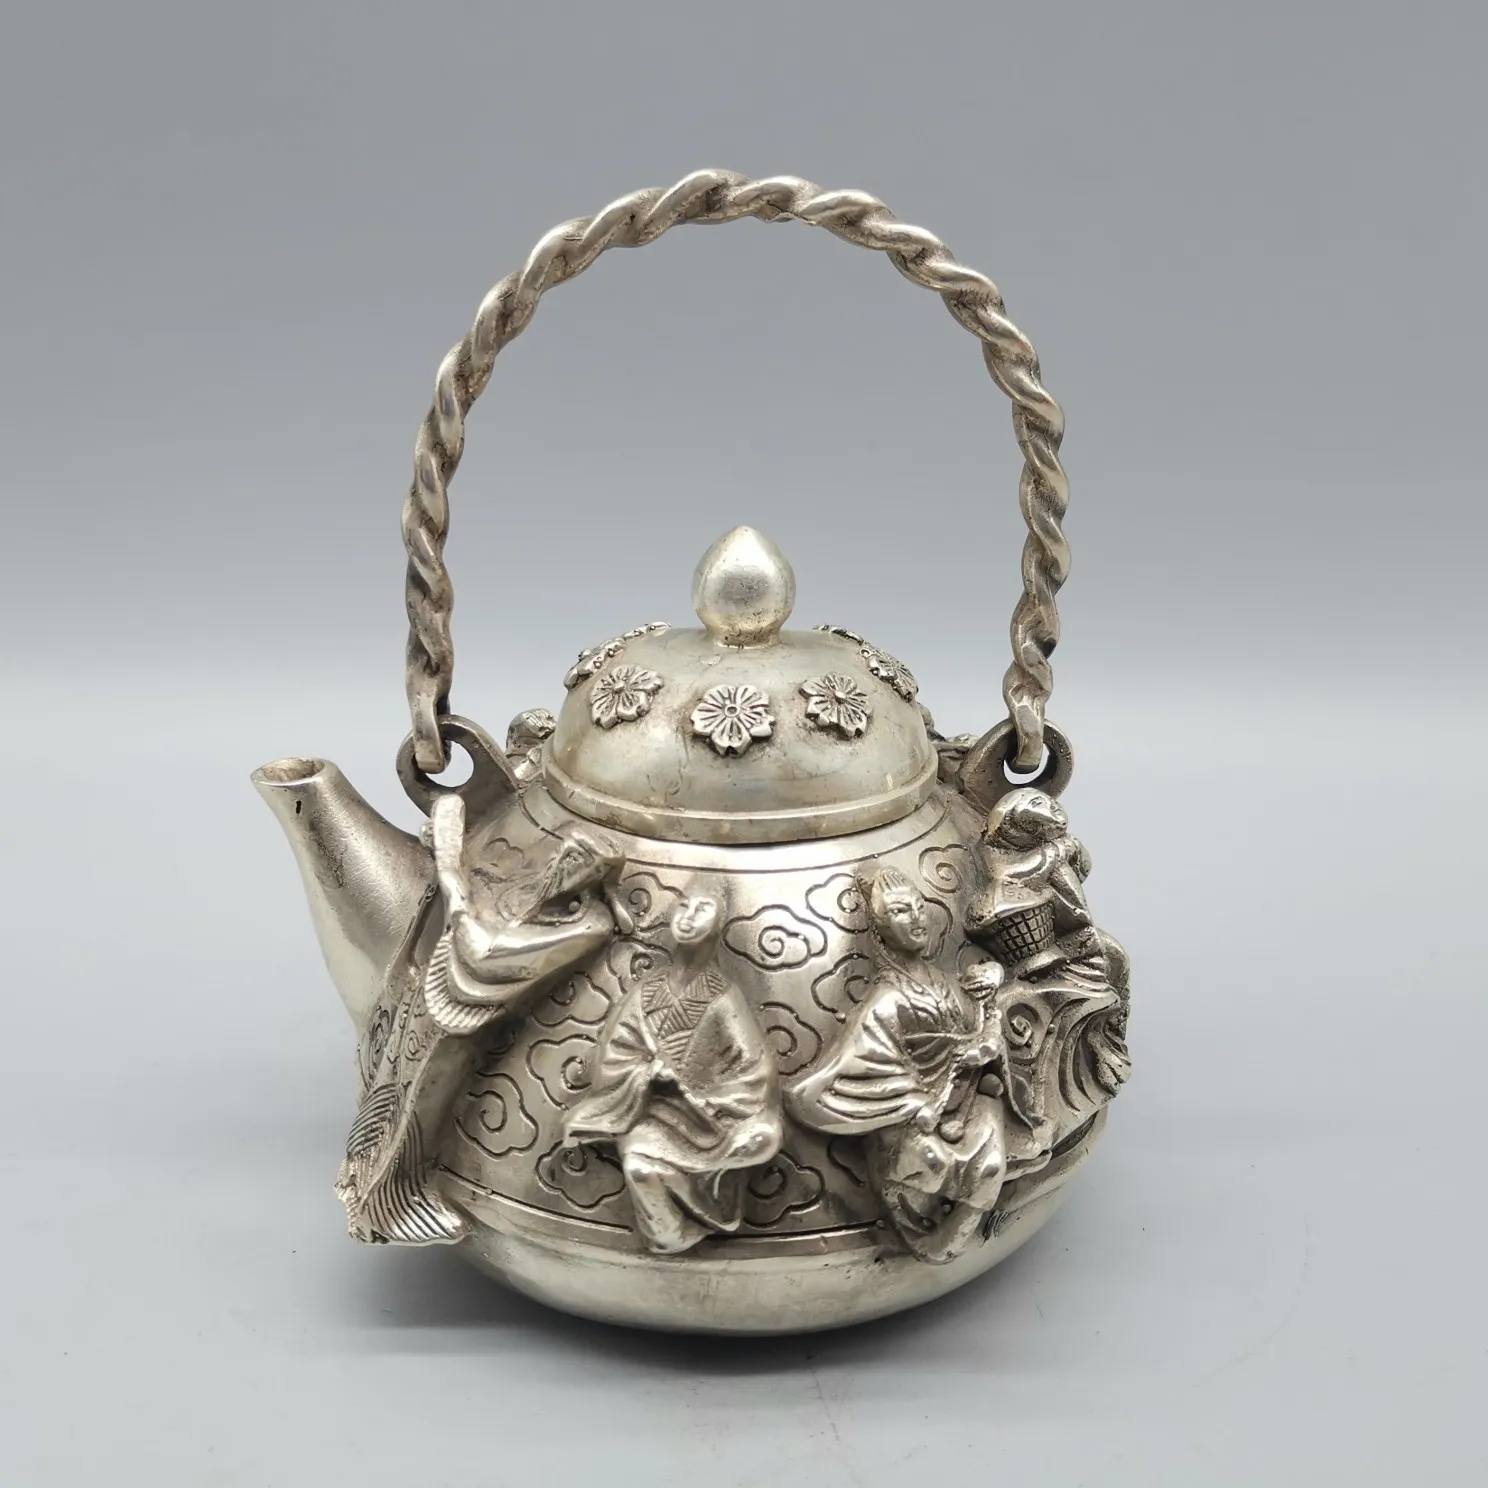 

Collect China Fine Workmanship Tibetan Silver White Copper Sculpture 'The Eight Immortals' Kettle Metal Crafts Home Decoration